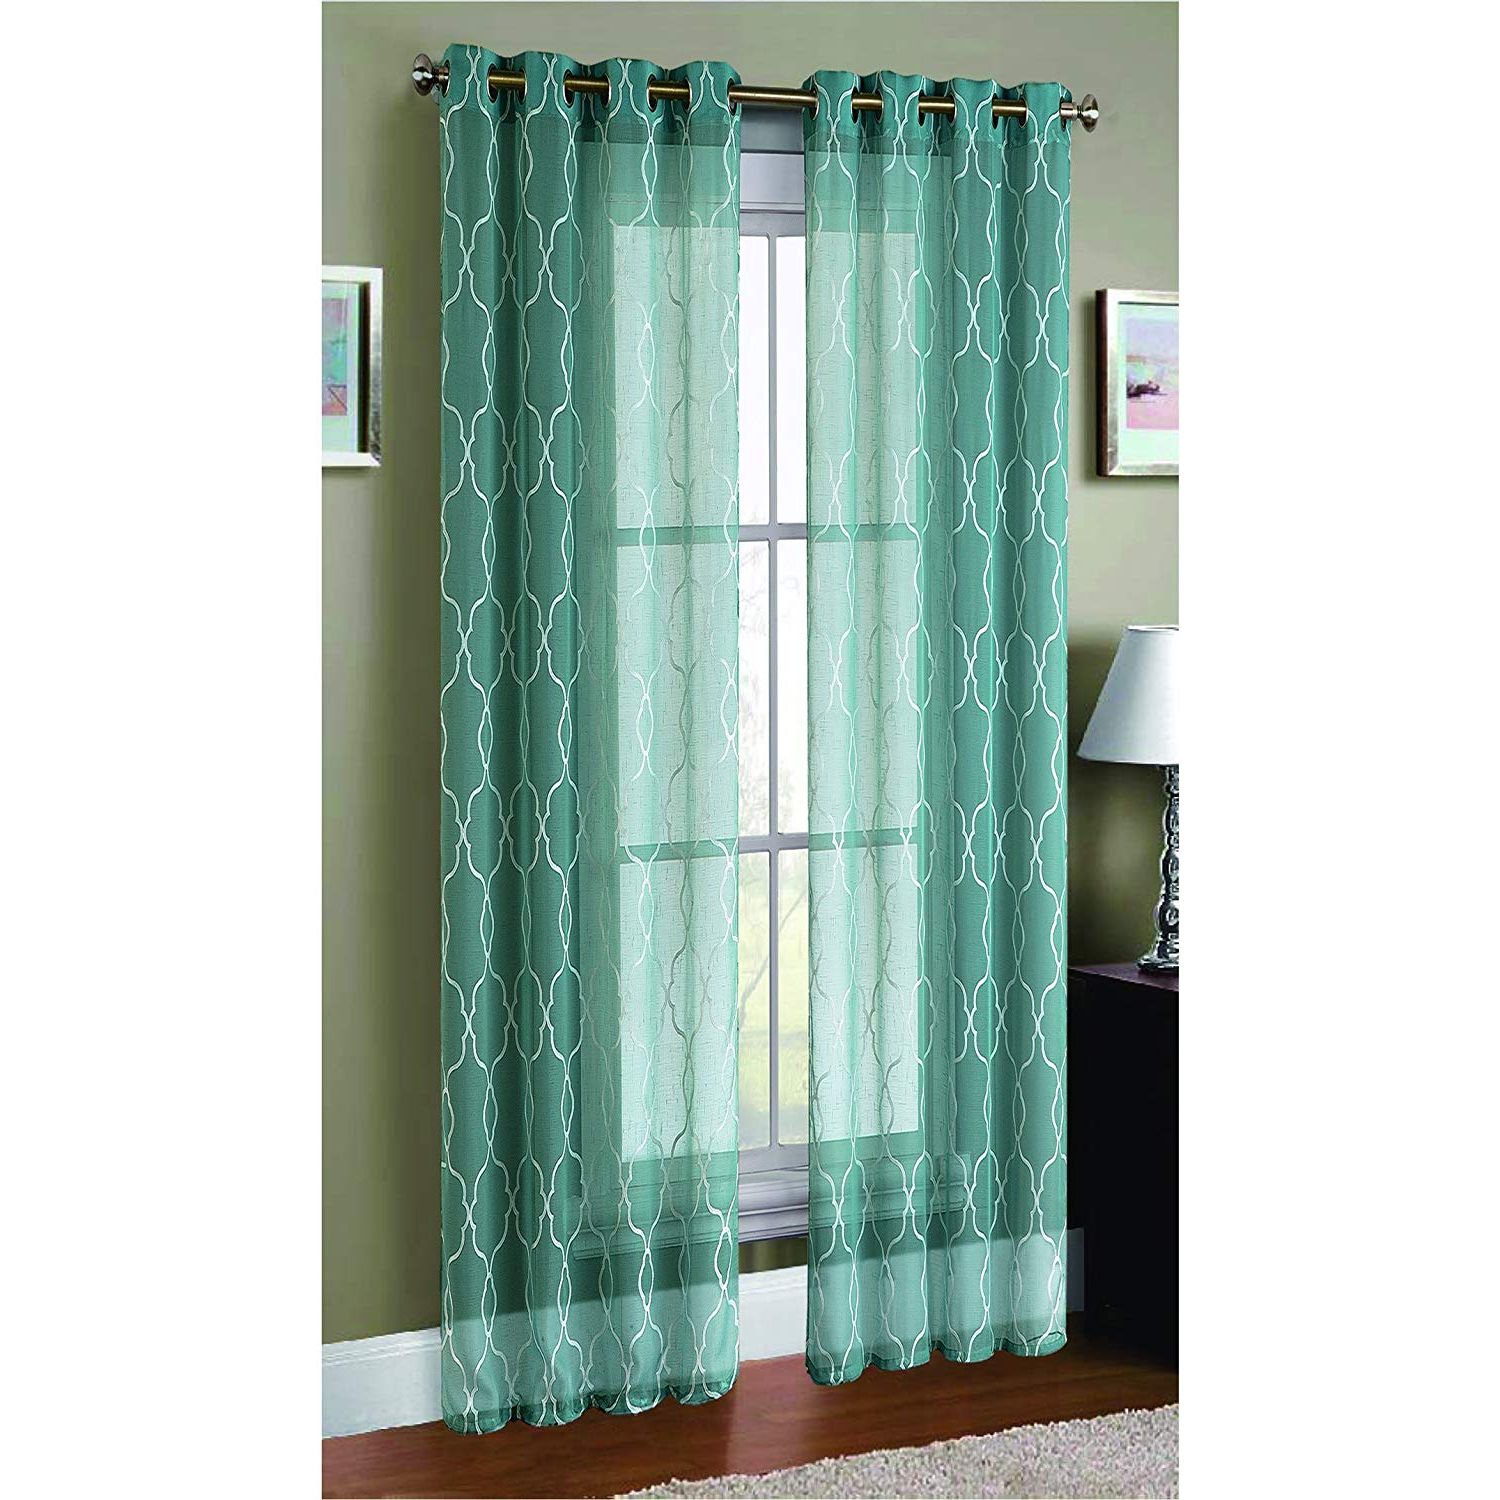 Wavy Leaves Embroidered Sheer Extra Wide Grommet Curtain Panels Within Favorite Window Elements Boho Embroidered Sheer Faux Linen Extra Wide 108 X 96 In (View 16 of 20)